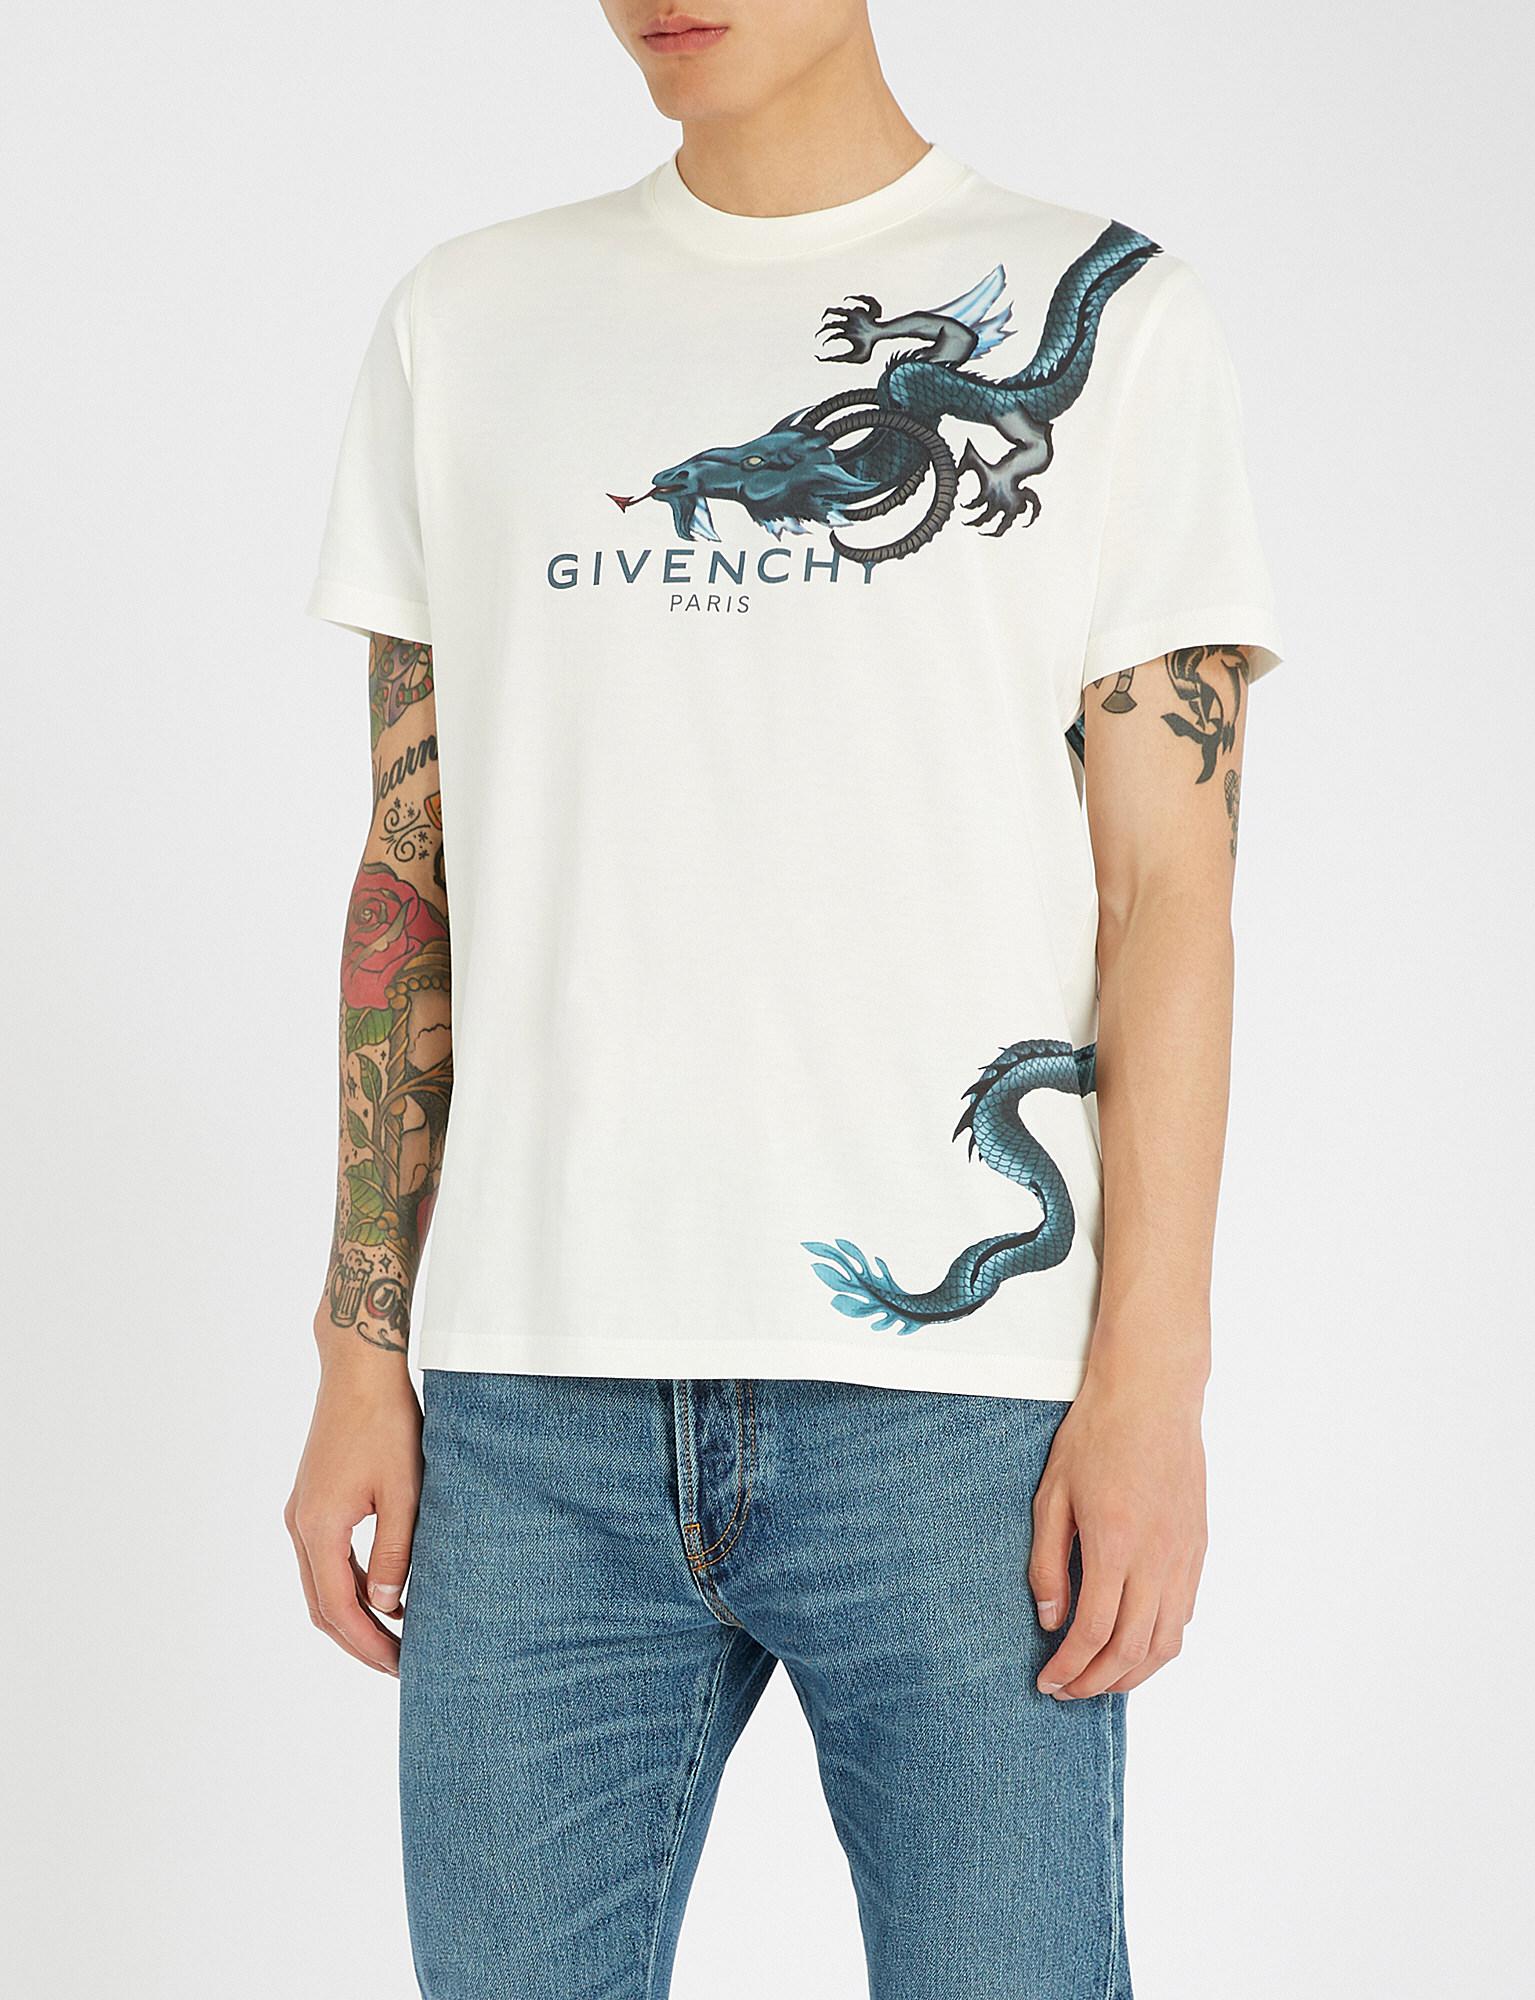 Givenchy Cotton Dragon White T Shirt for Men - Lyst